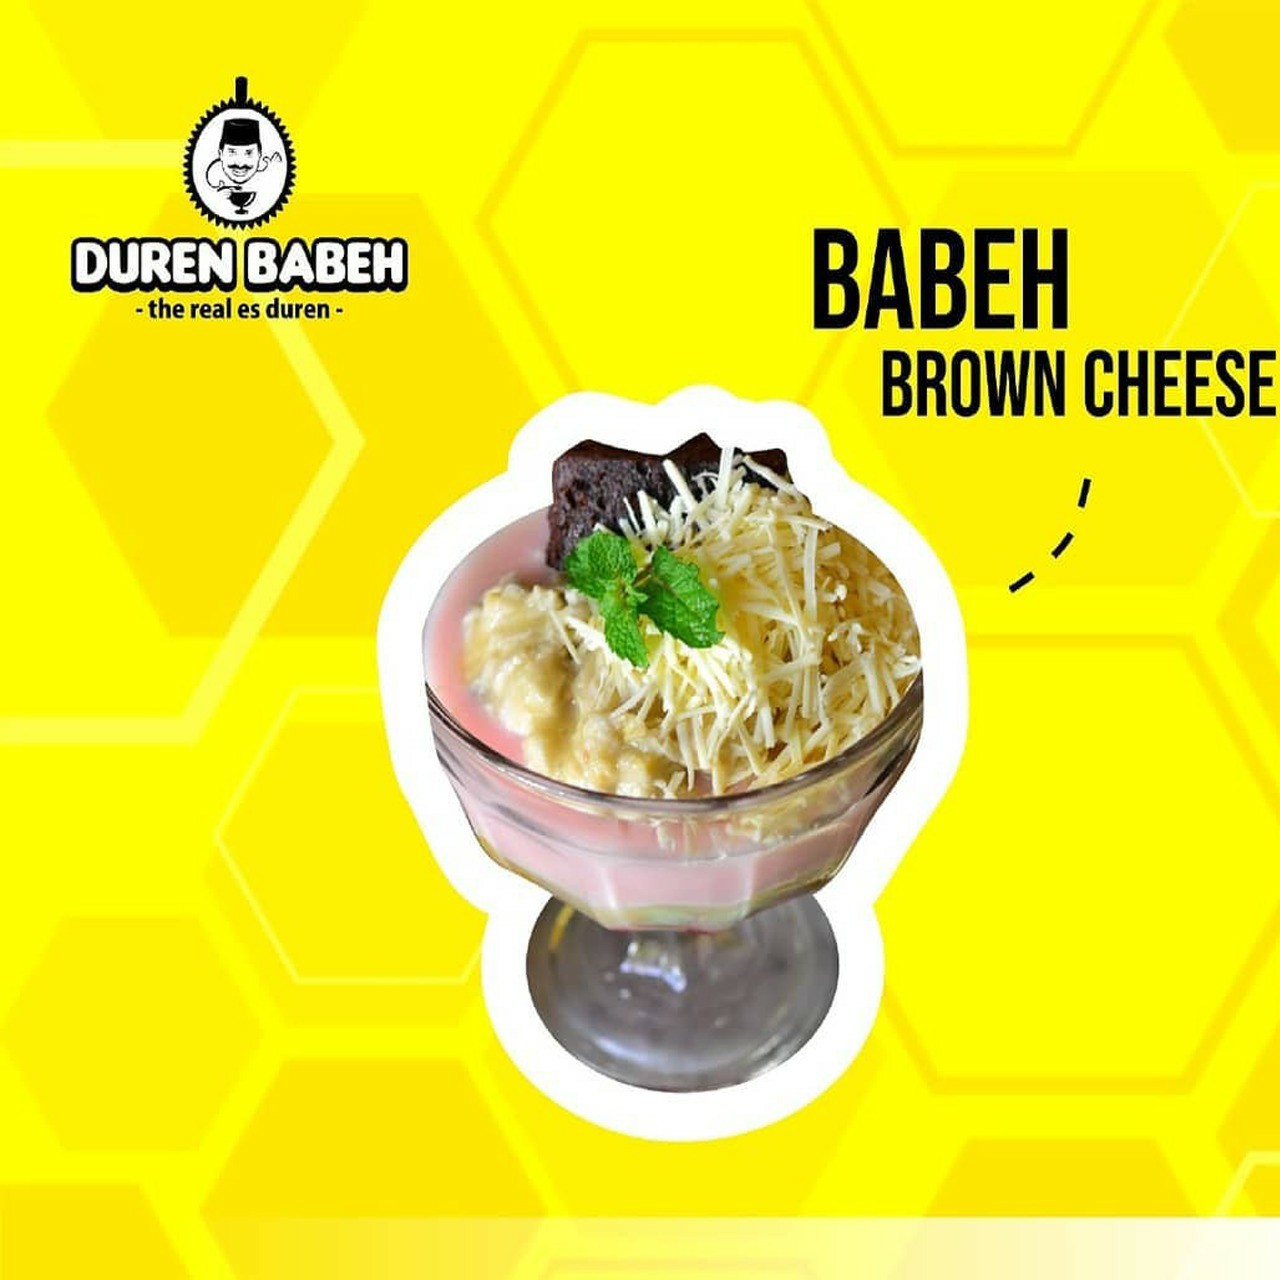 Babeh Brown Cheese